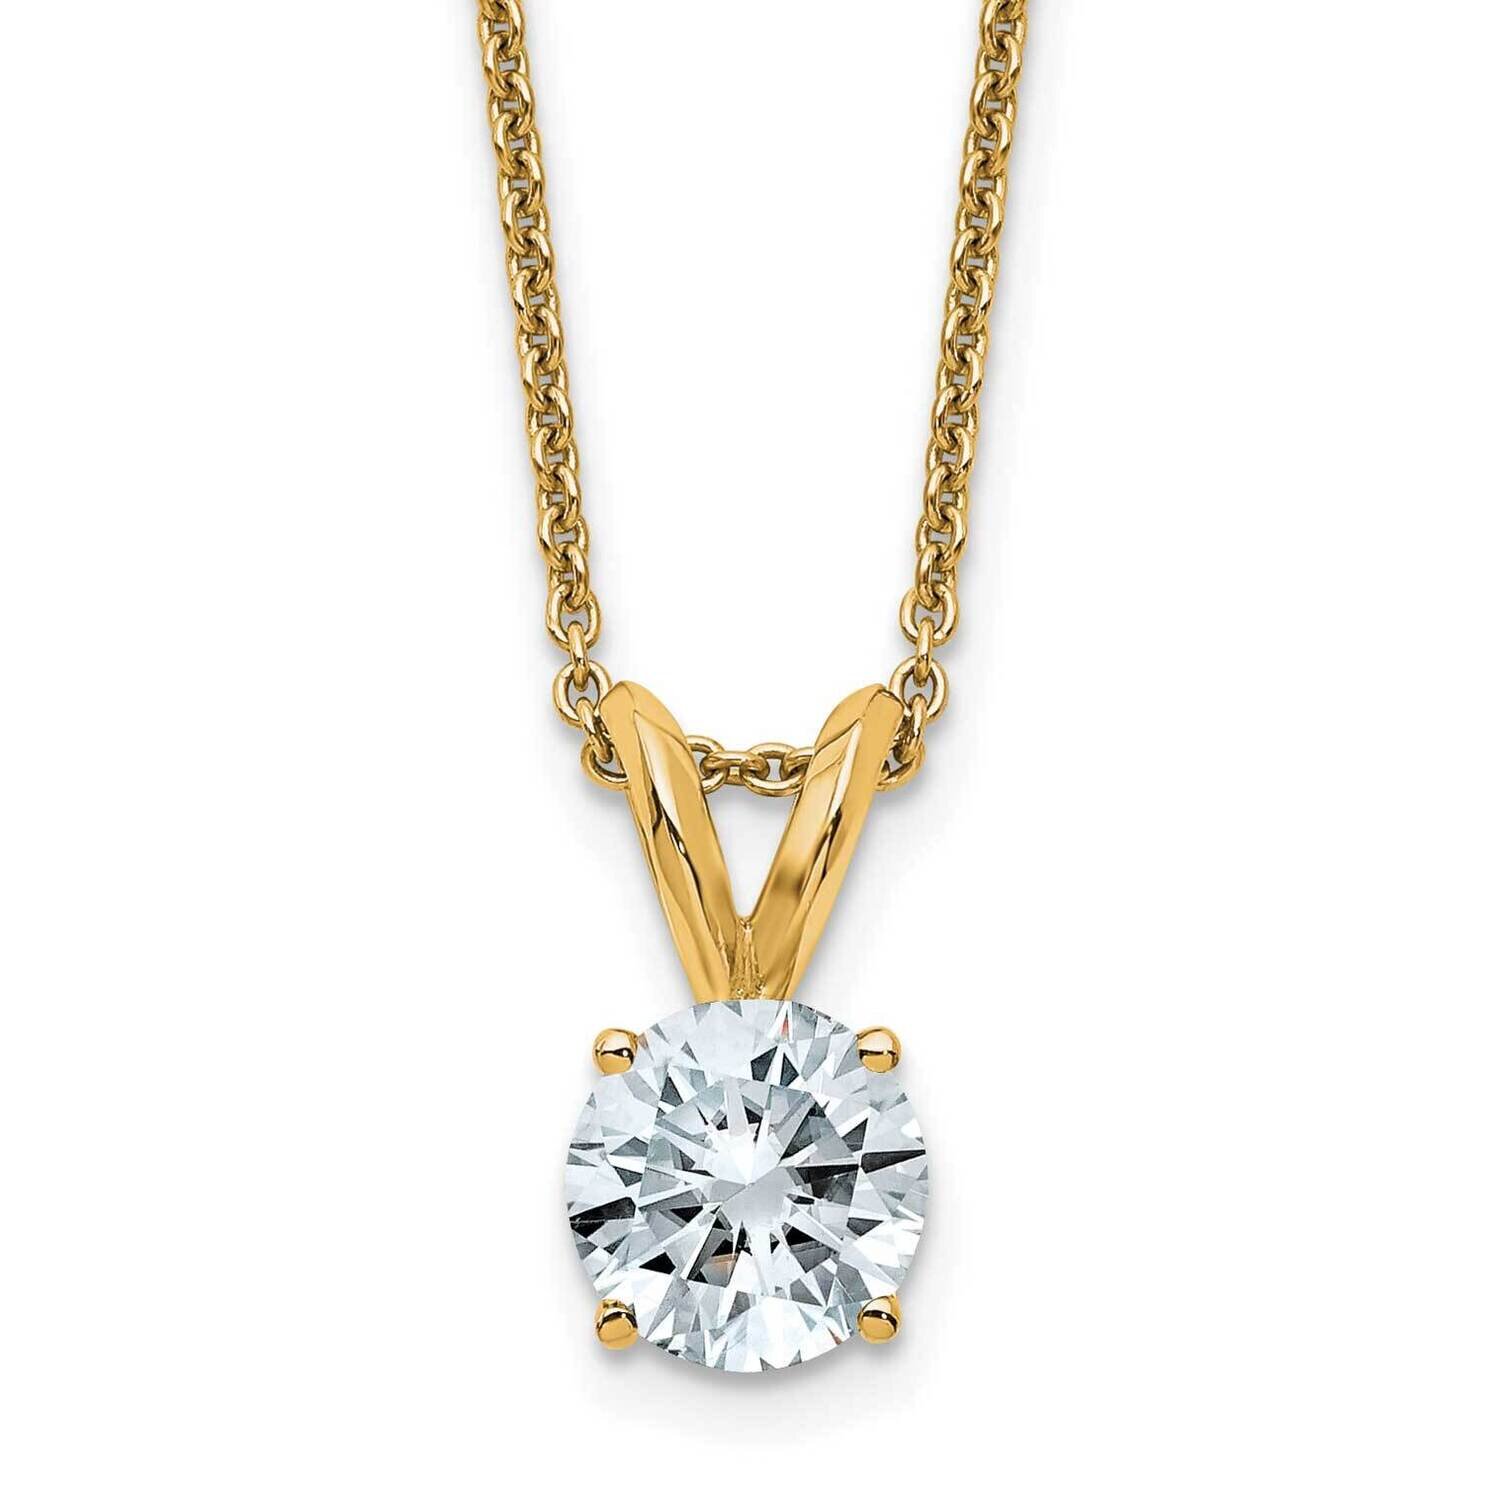 1ct. 6.5mm Round D E F Pure Light Moissanite Solitaire Necklace 14k Gold YG936-9MP